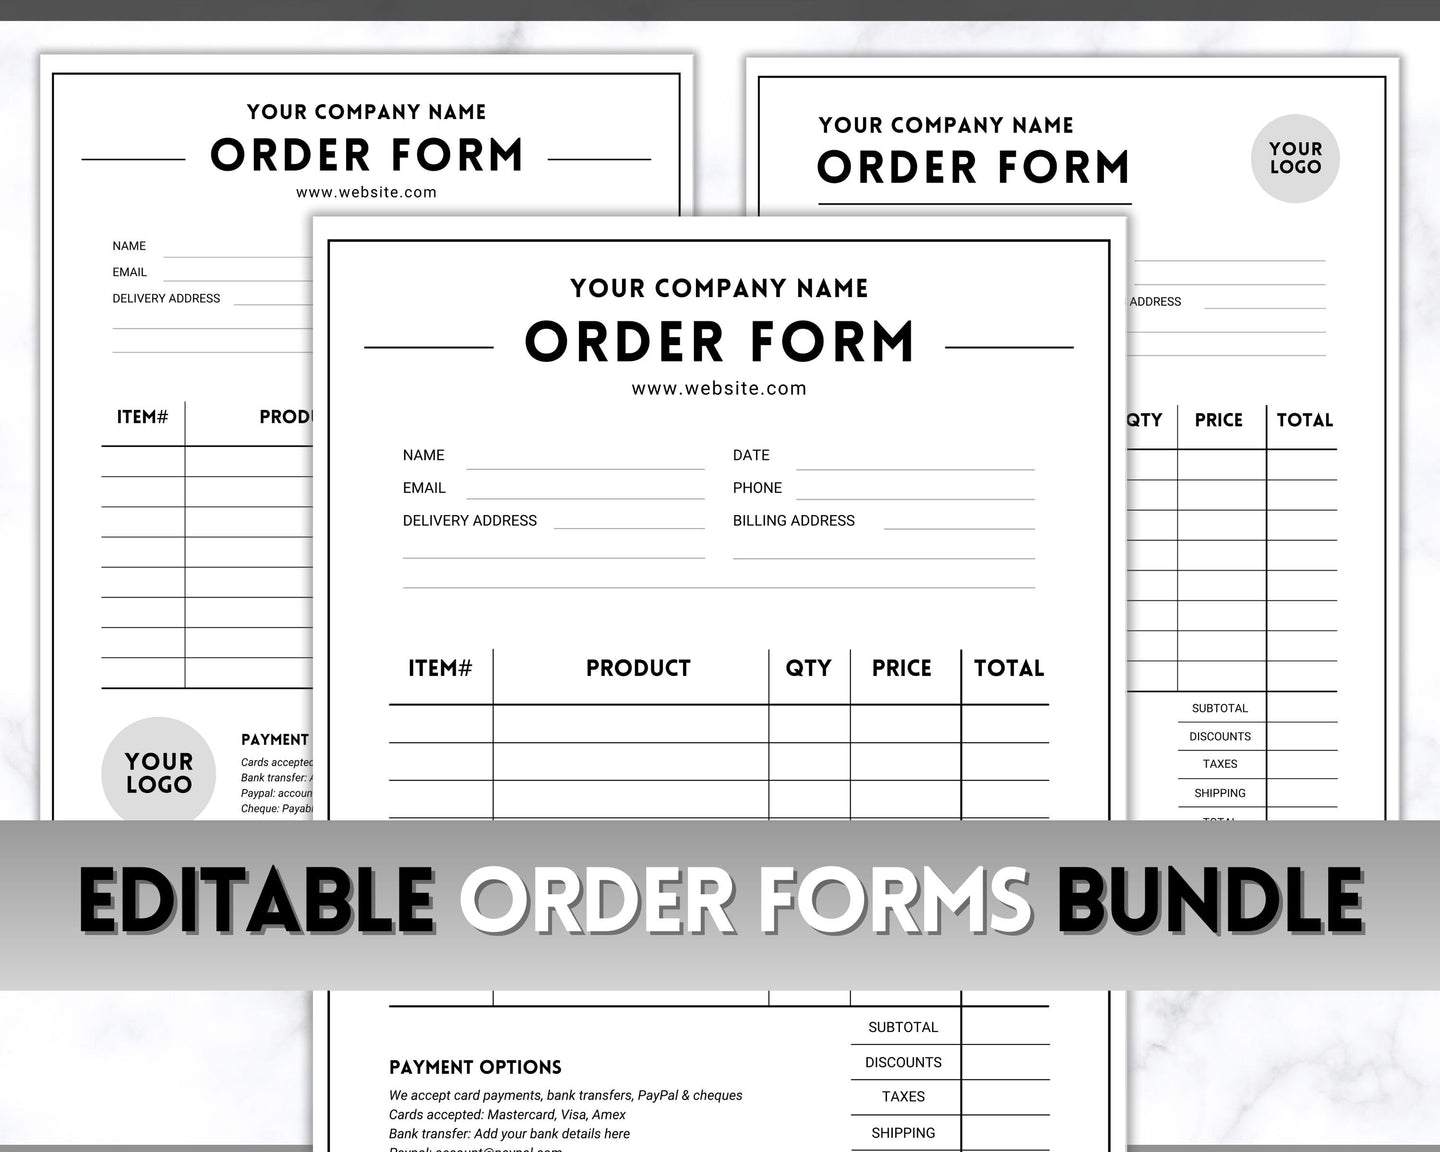 EDITABLE Order Form Template BUNDLE | 7 Order Form Canva Templates for Small Businesses